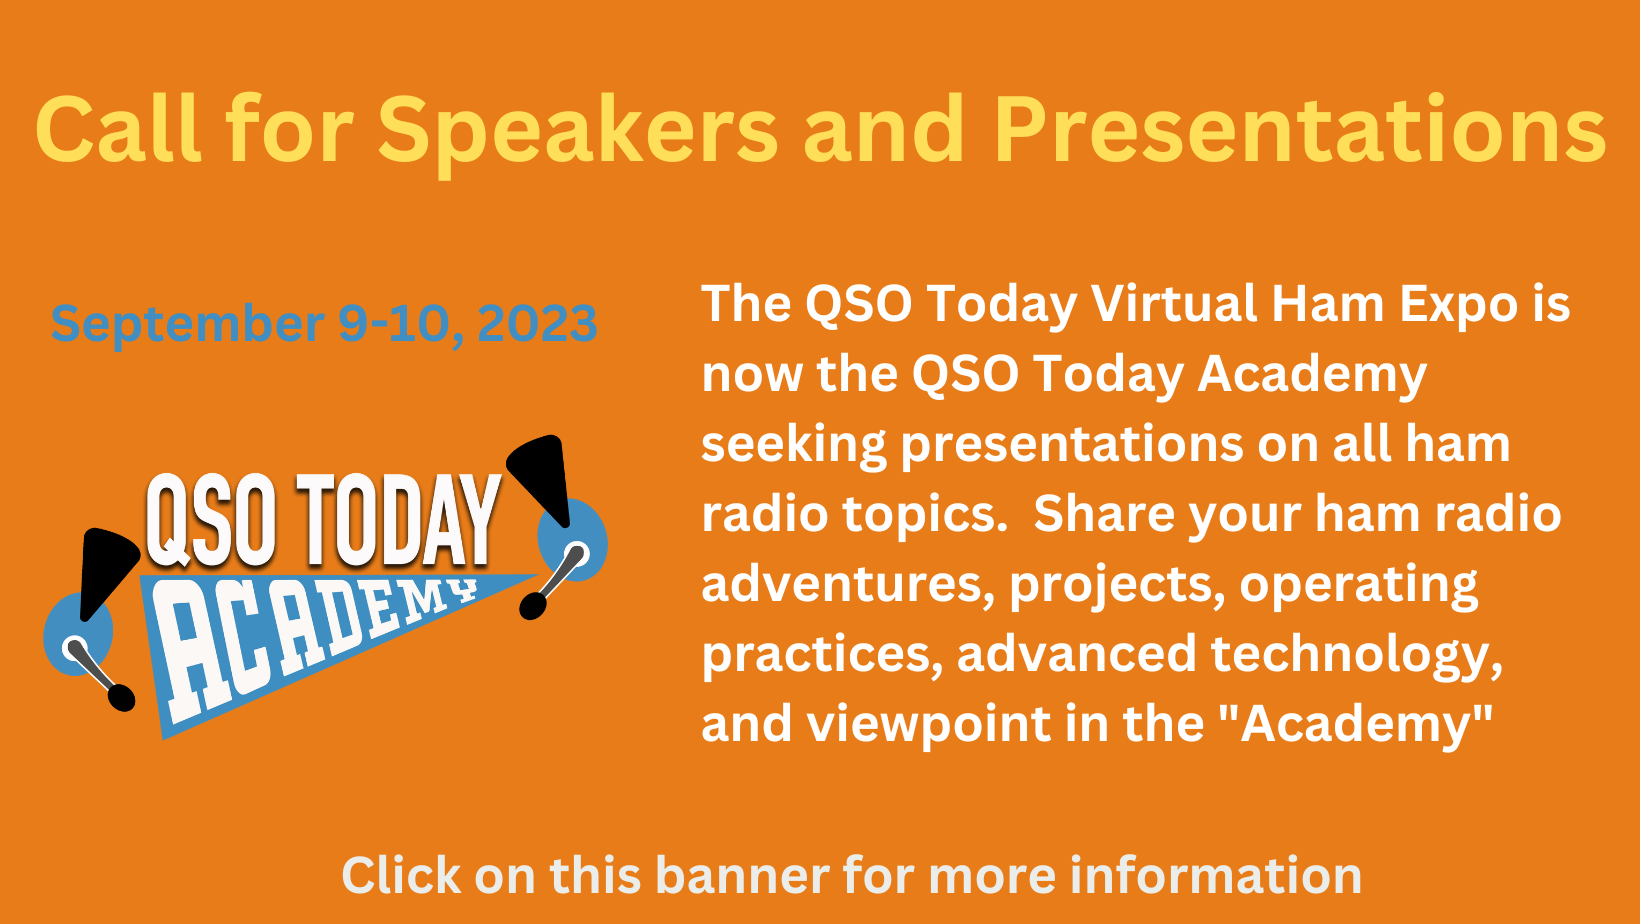 Call for Speakers and Presentations for the Next QSO Today Academy Event